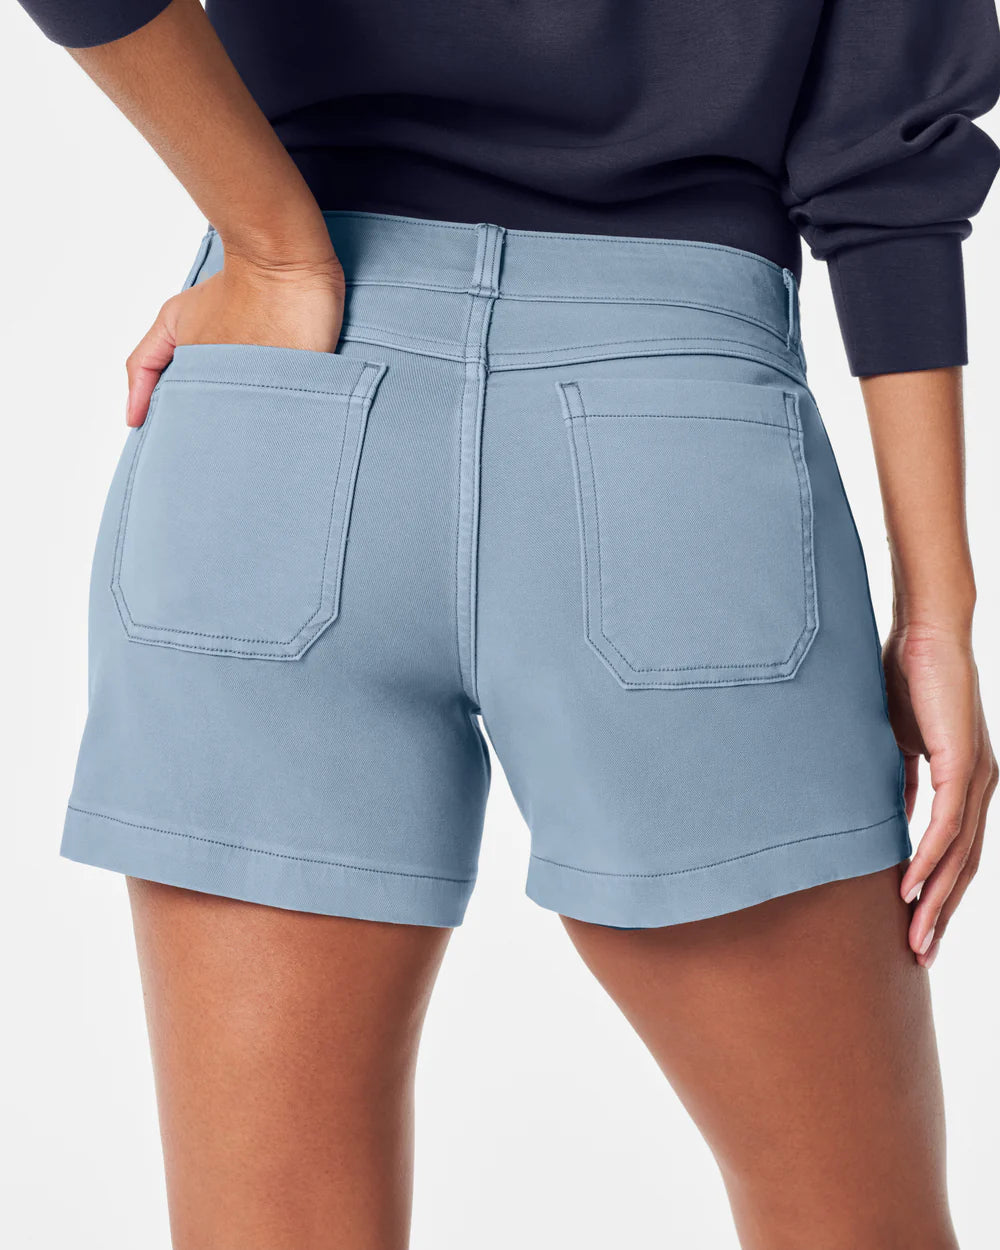 spanx stretch twill shorts 4" in mountain blue-back detail 